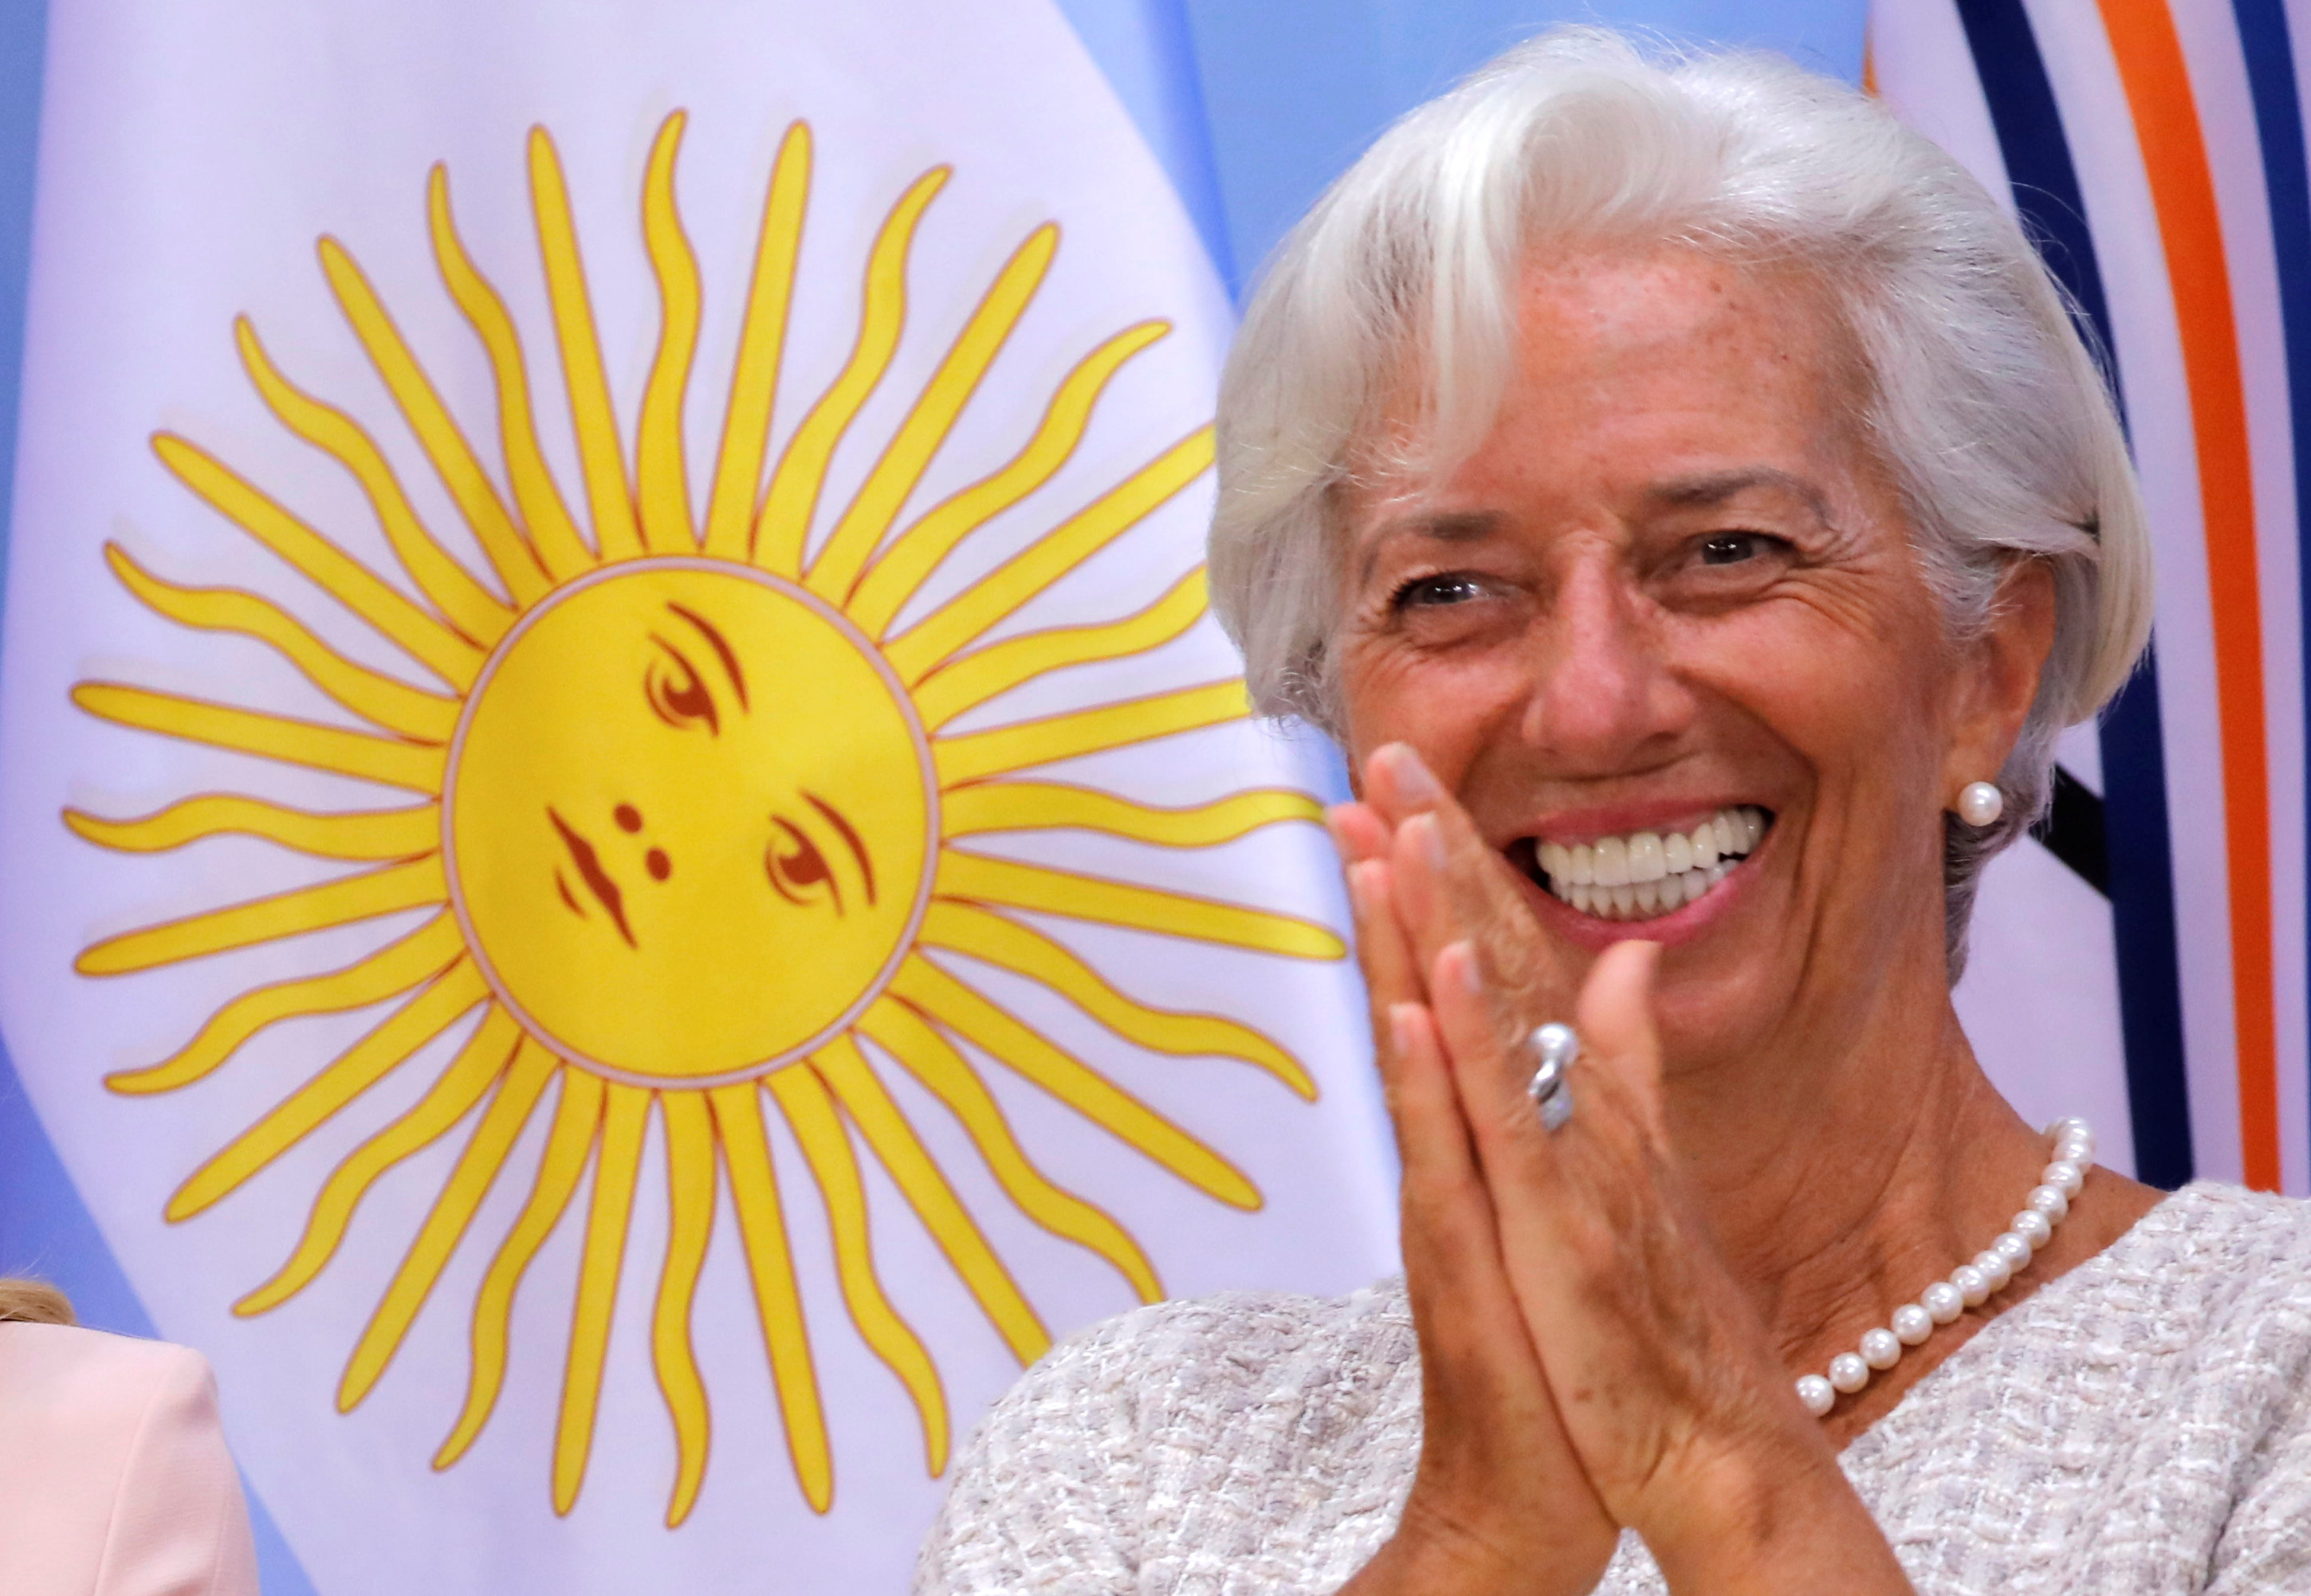 IMF chief asks world to seize opportunity of global recovery